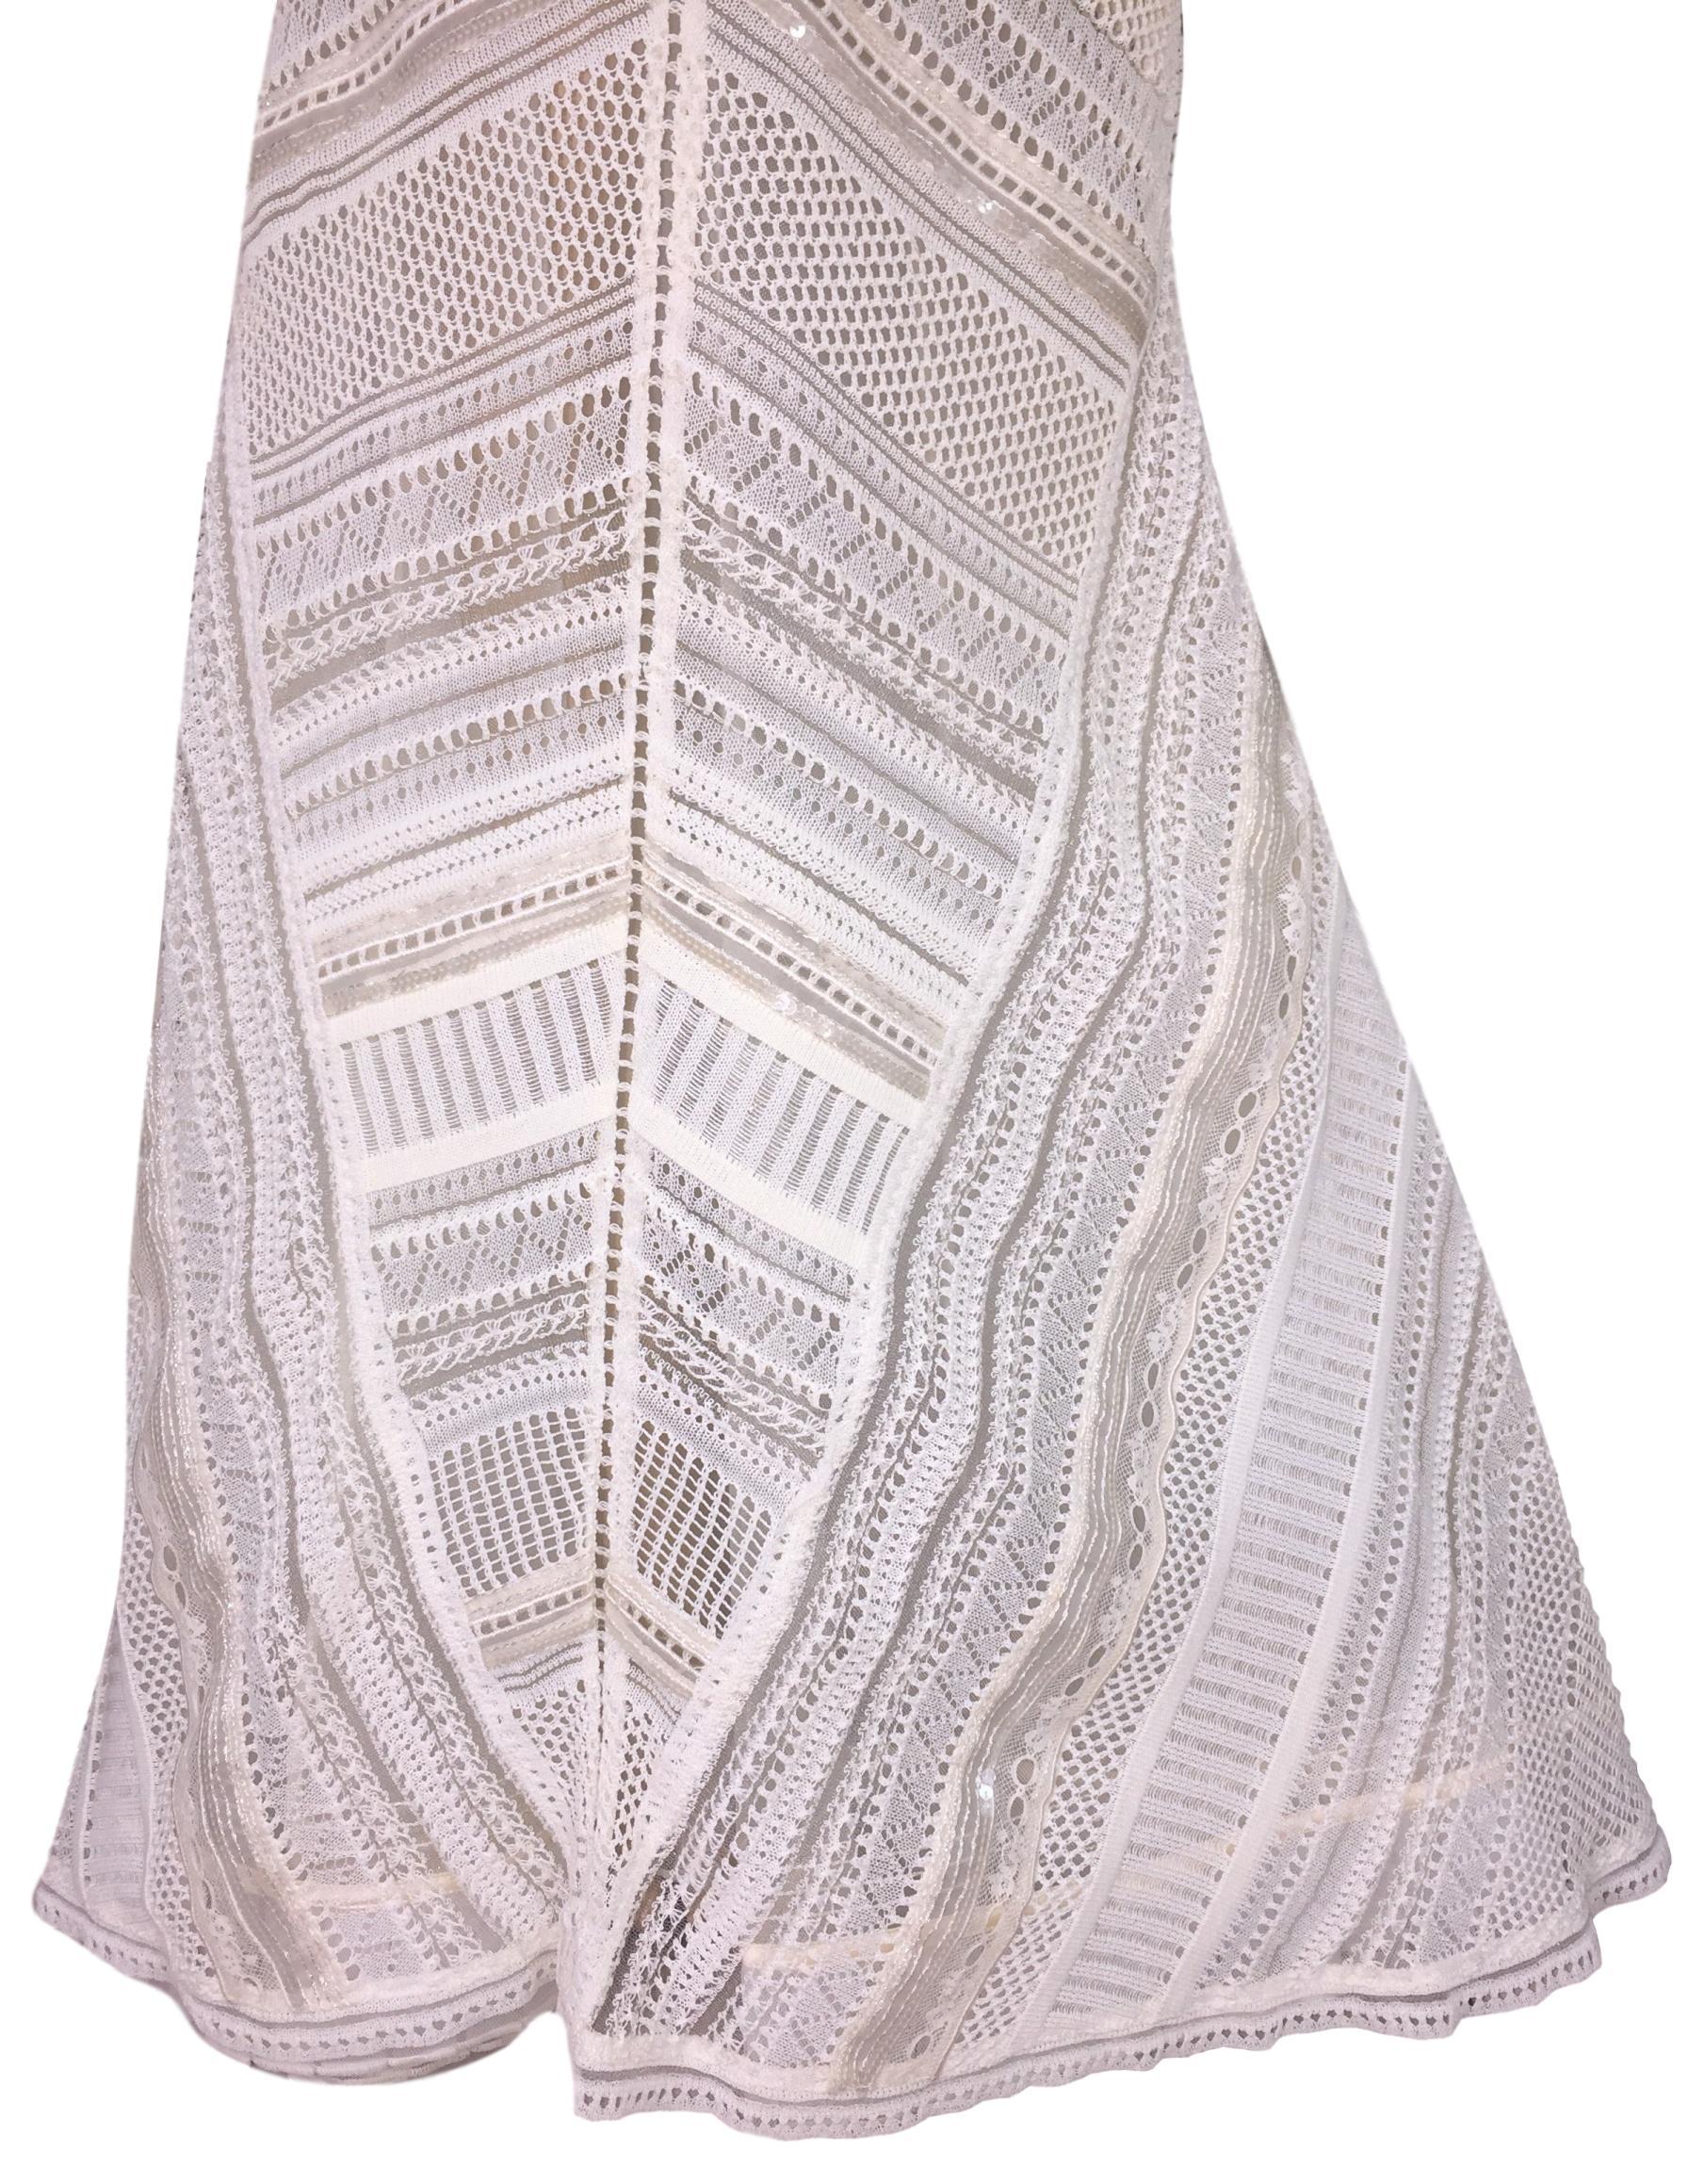 Gray Gianfranco Ferre Sheer Ivory Knit Embellished Bridal Mermaid Gown Dress S/S 1998